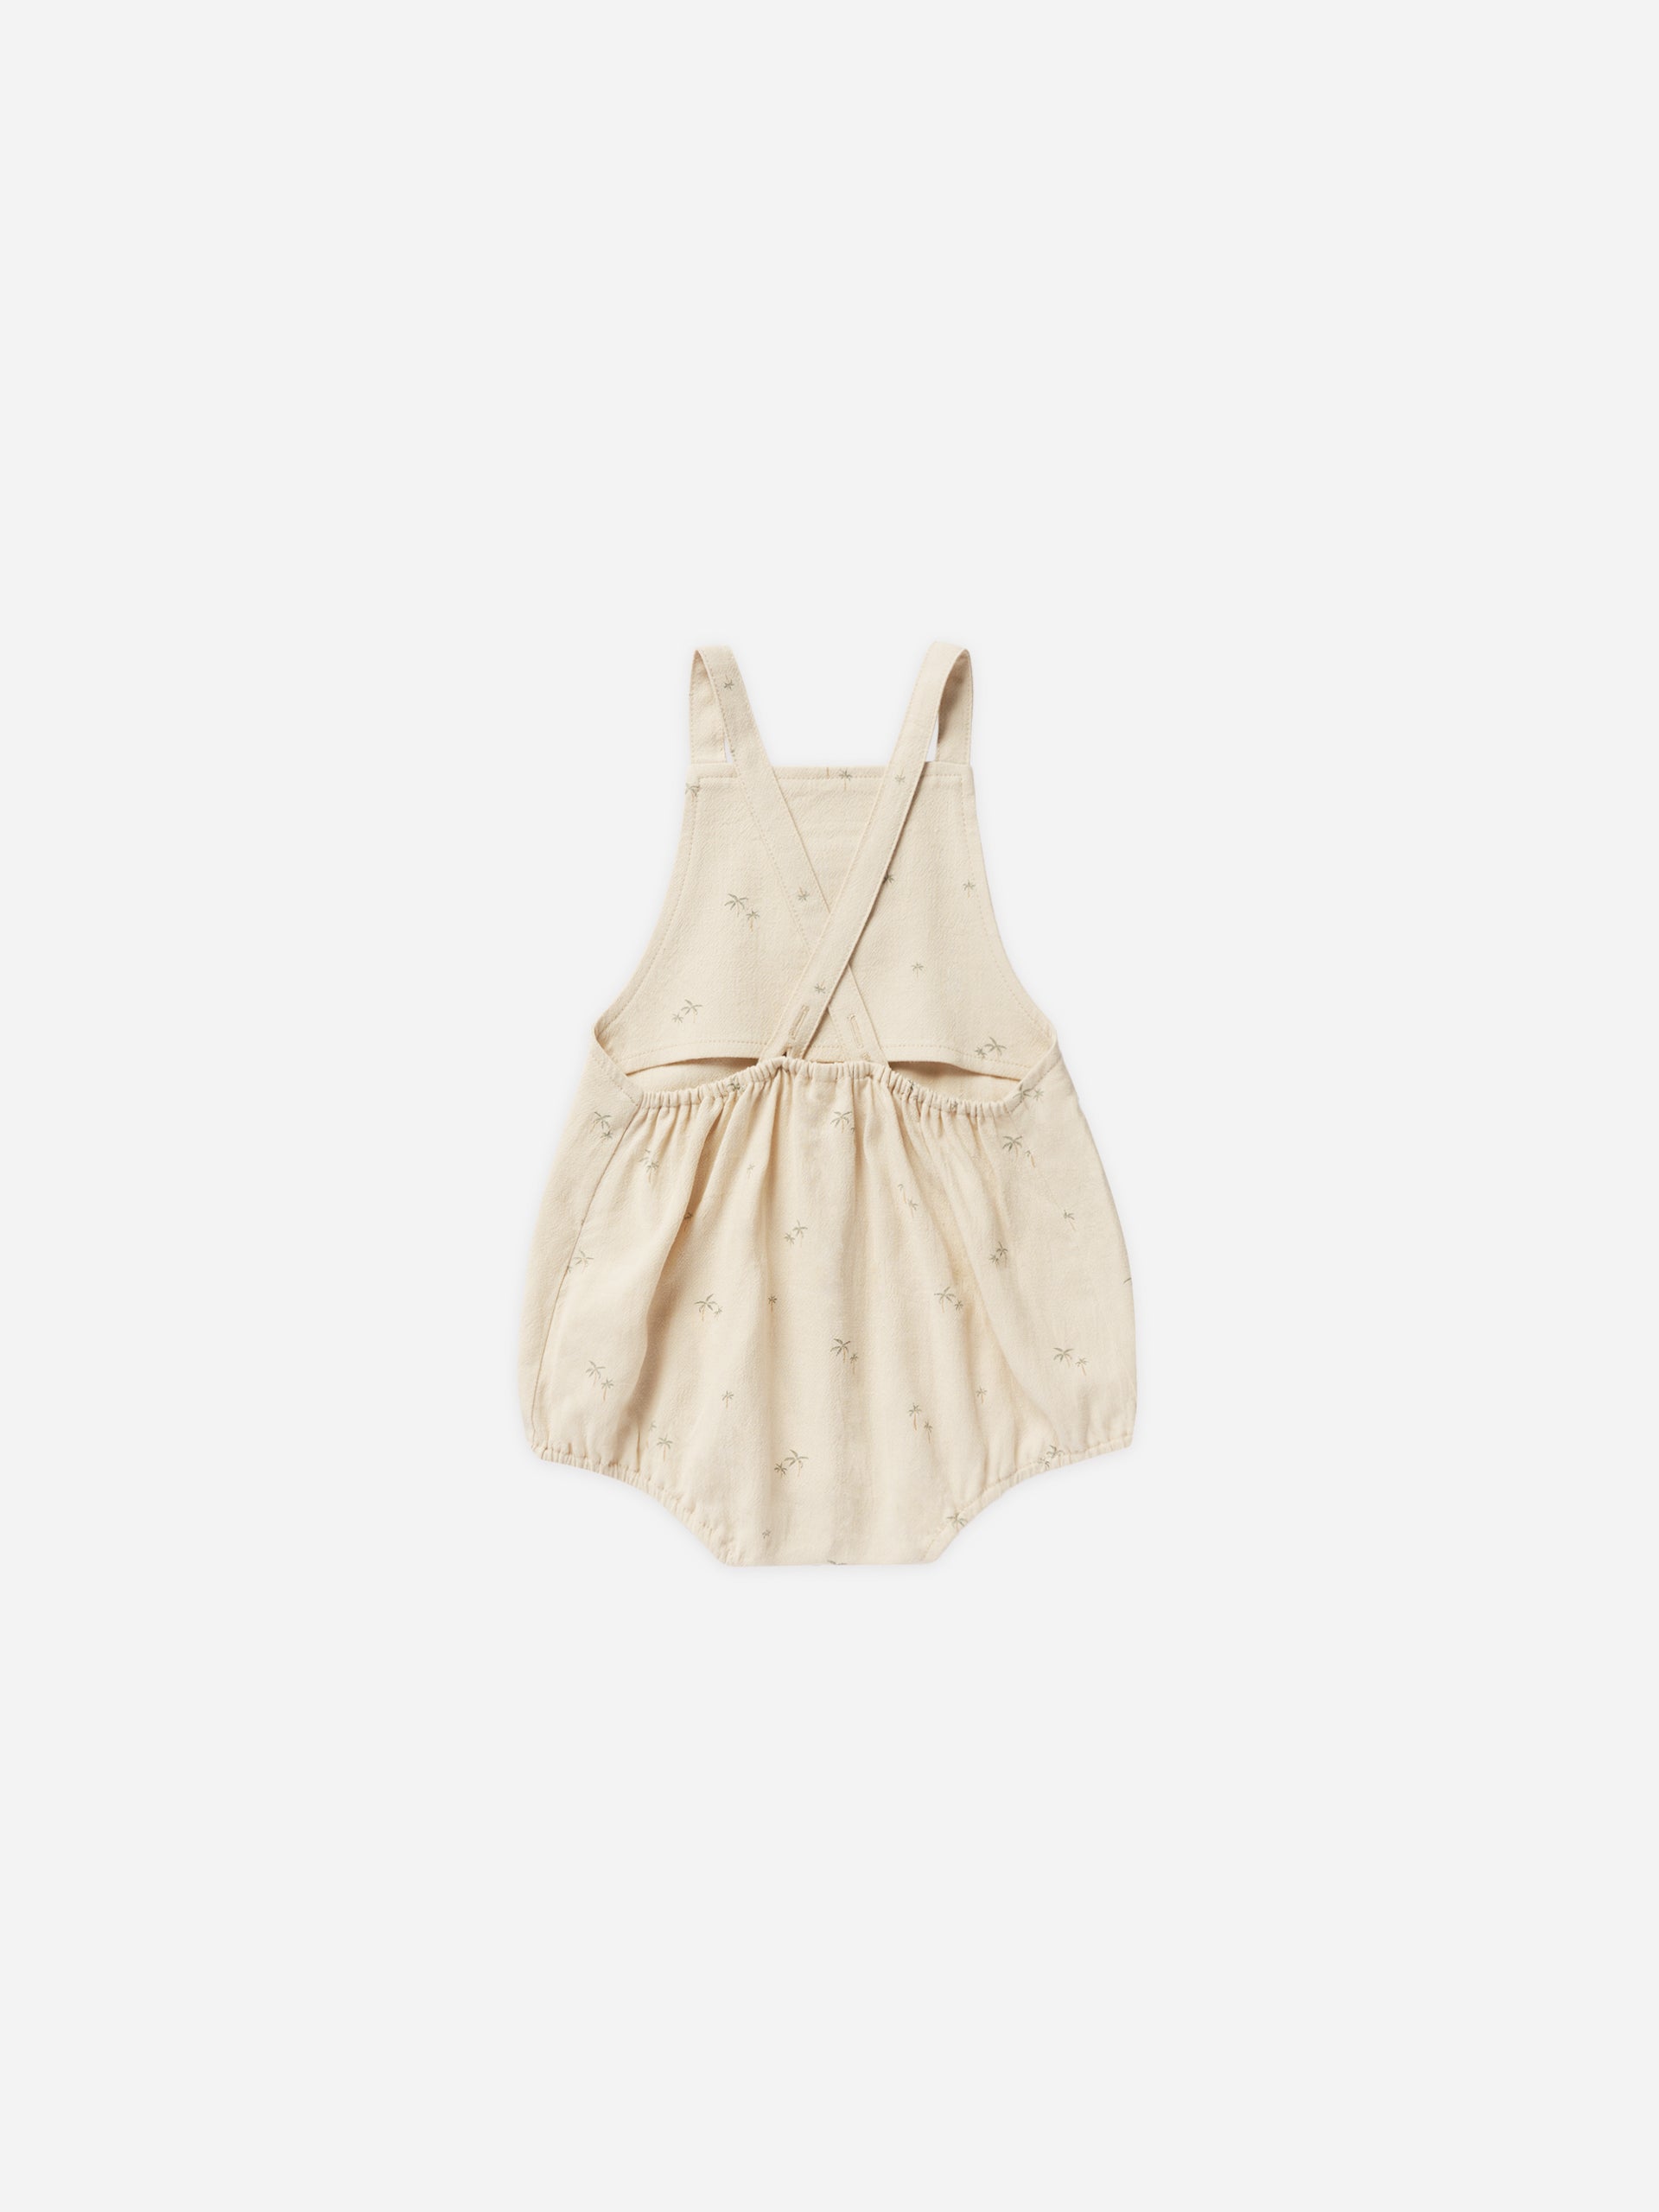 Criss Cross Romper || Palm - Rylee + Cru | Kids Clothes | Trendy Baby Clothes | Modern Infant Outfits |